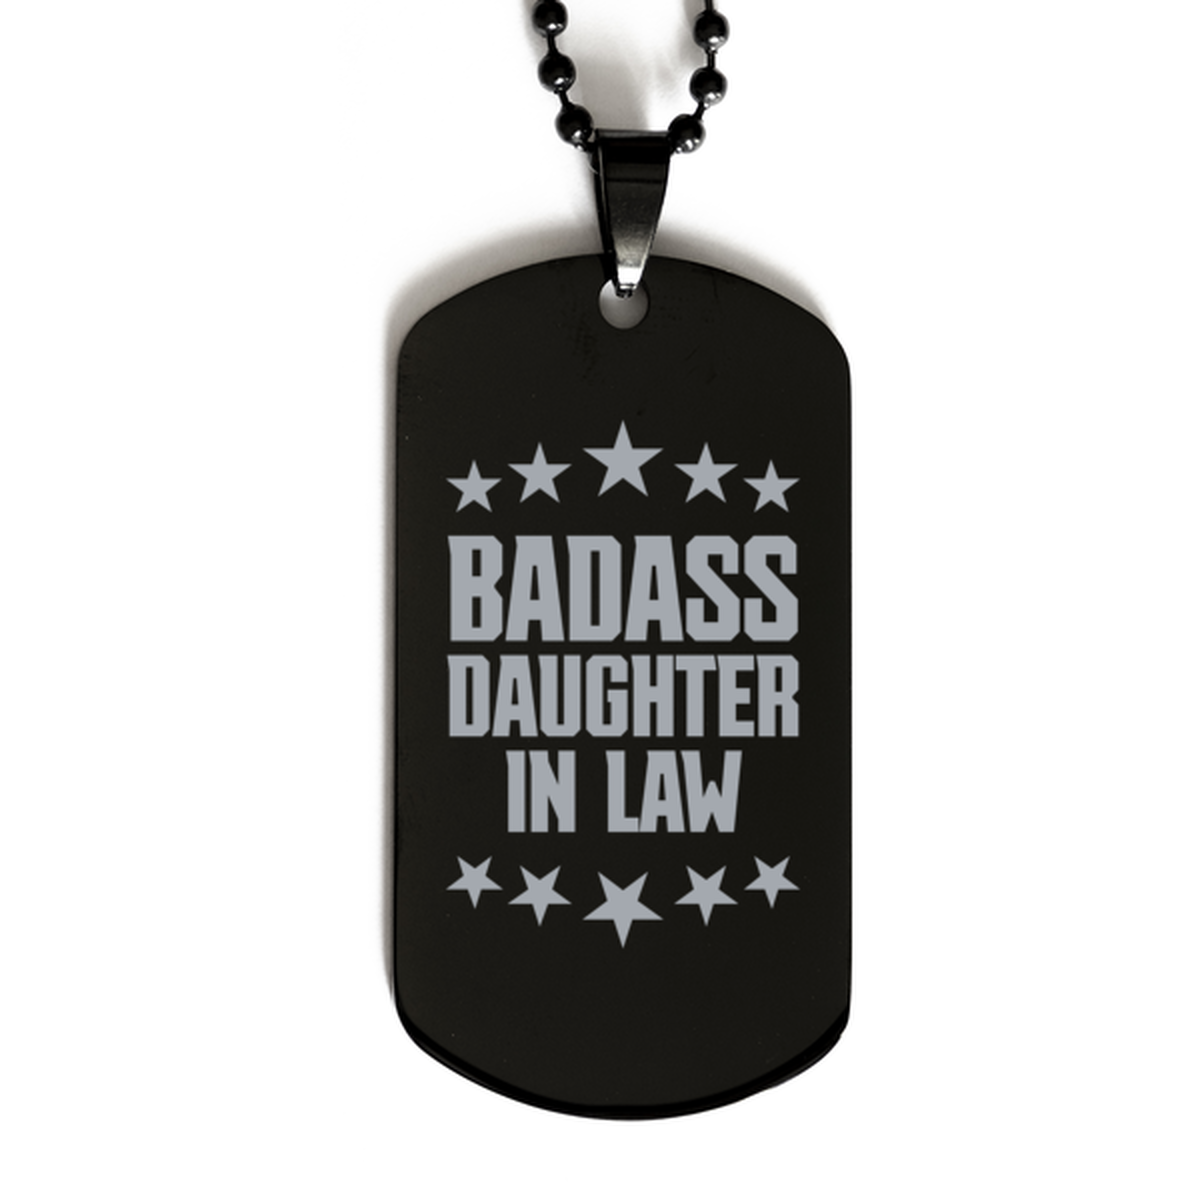 Daughter in law Black Dog Tag, Badass Daughter in law, Funny Family Gifts  Necklace For Daughter in law From Mother Father In Law